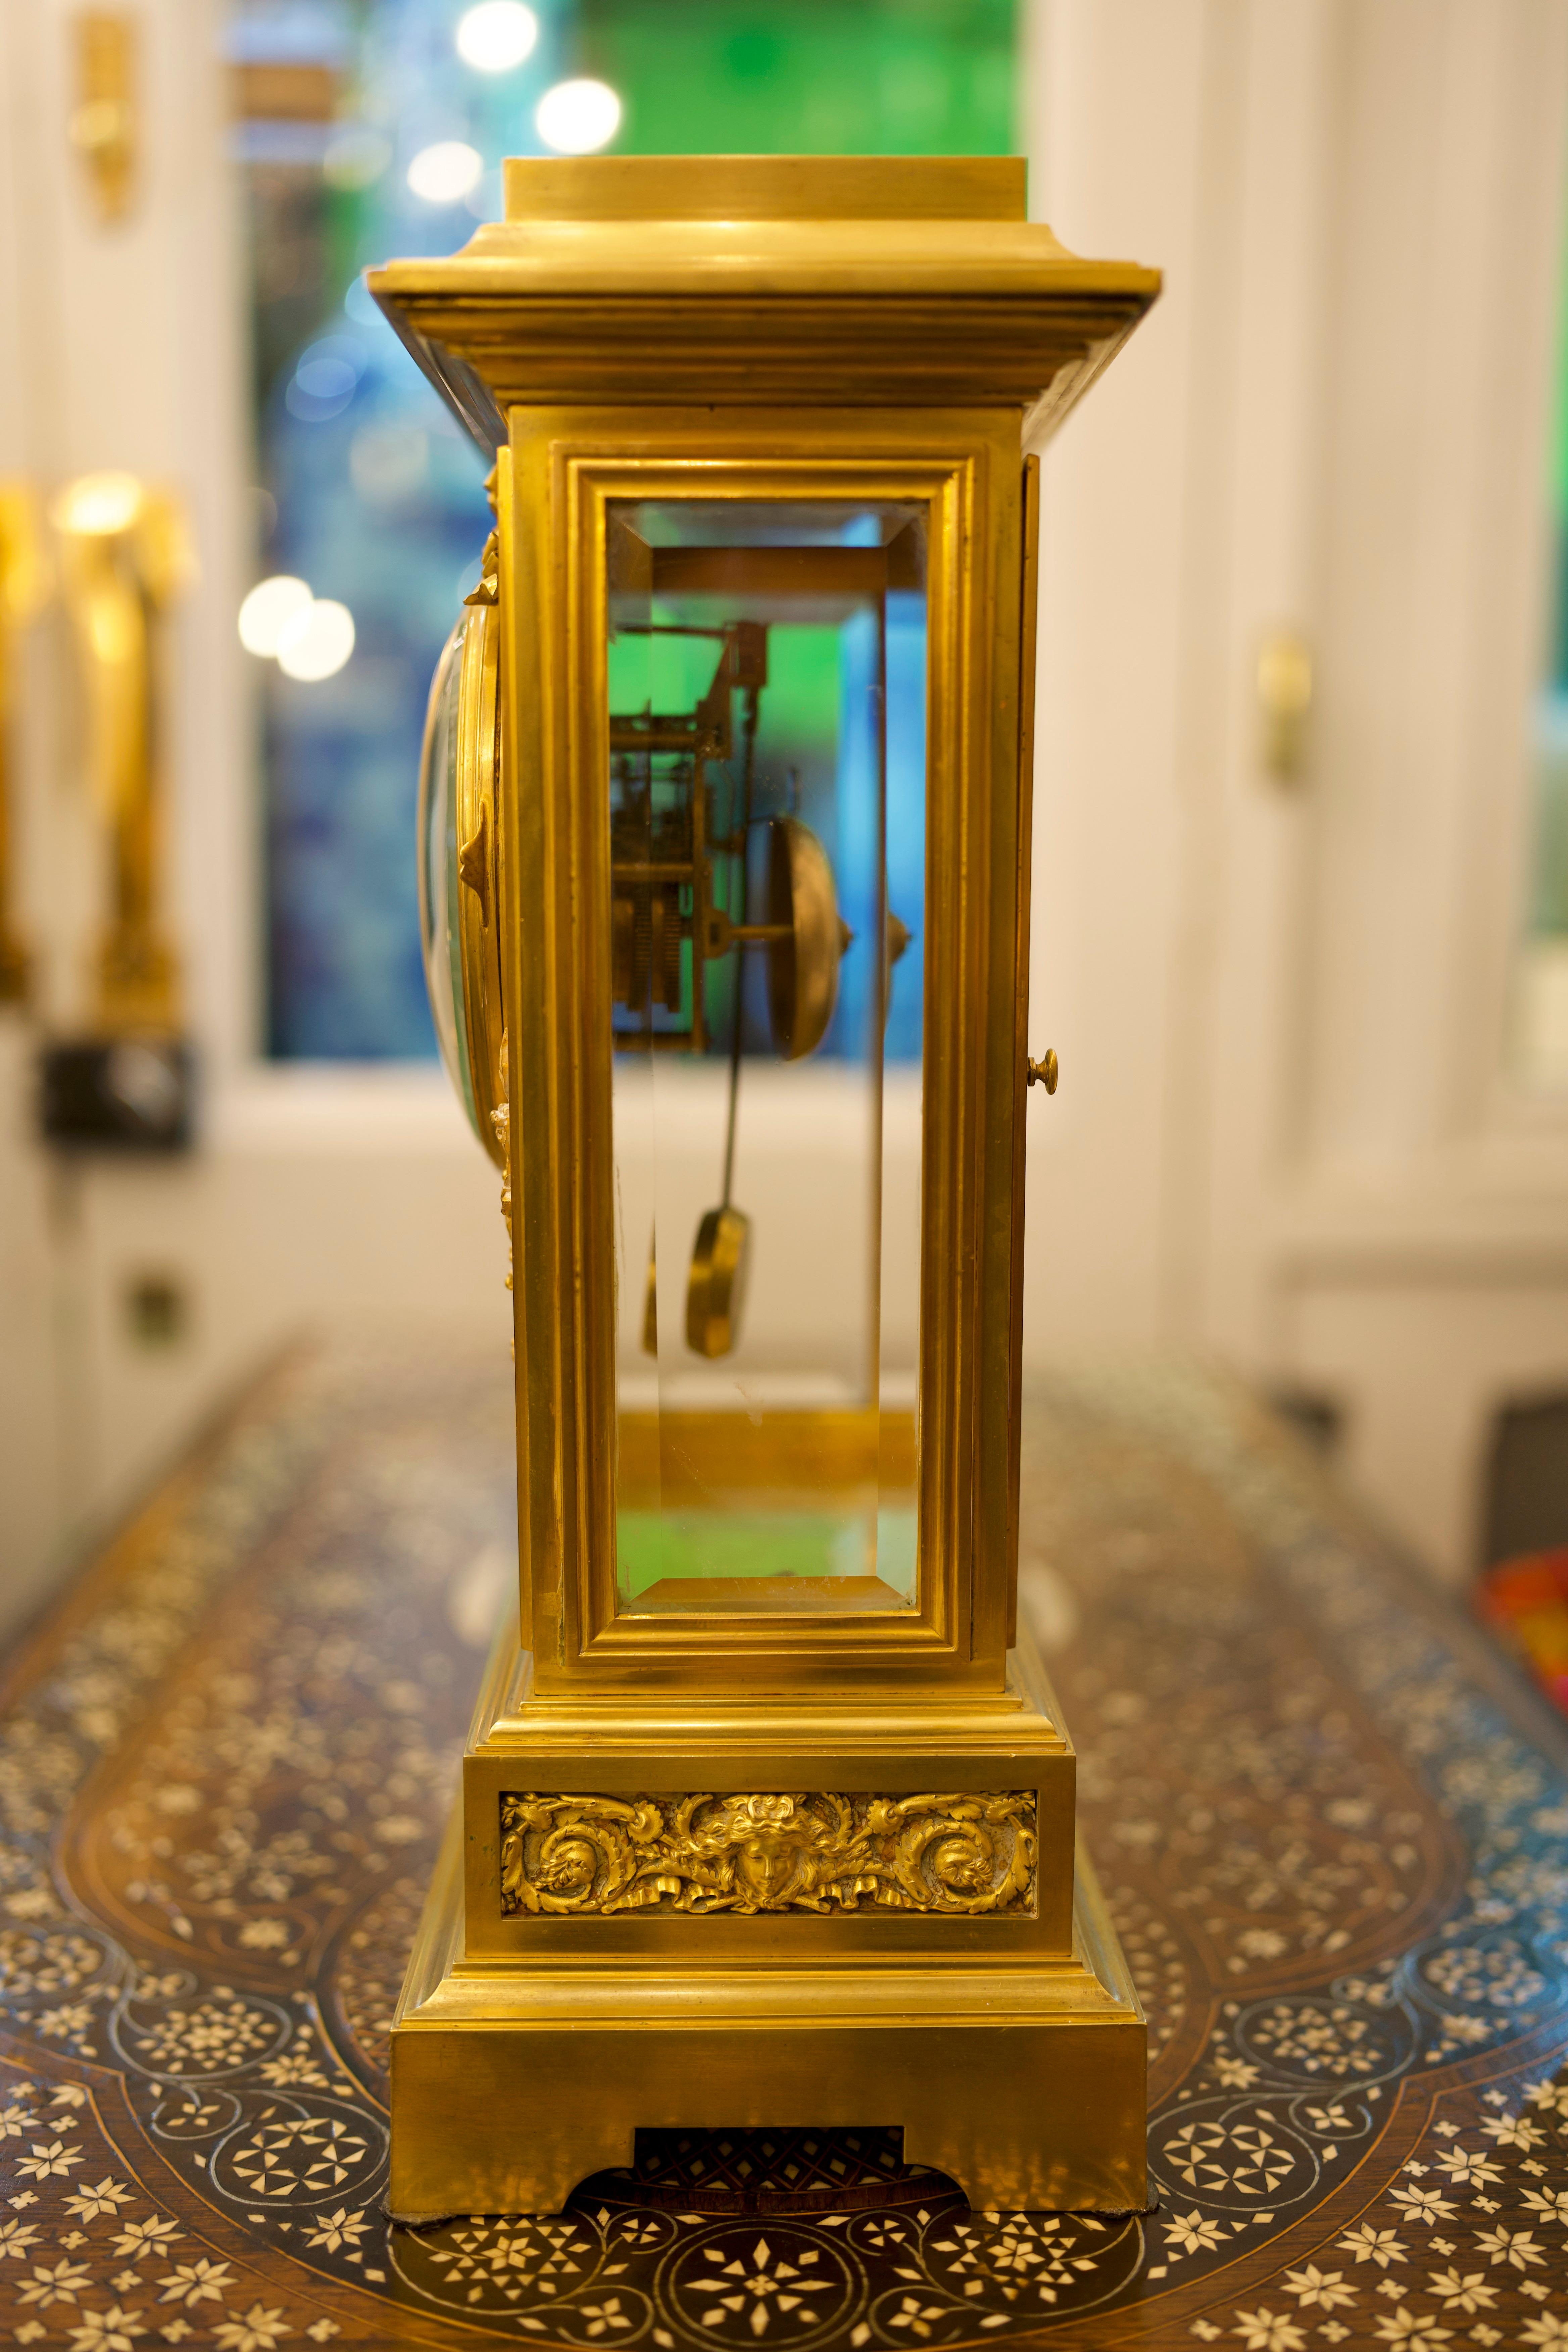 19th Century Louis XVI Style Regulator Gilt Bronze Clock by Ferdinand Berthoud In Excellent Condition For Sale In Southall, GB